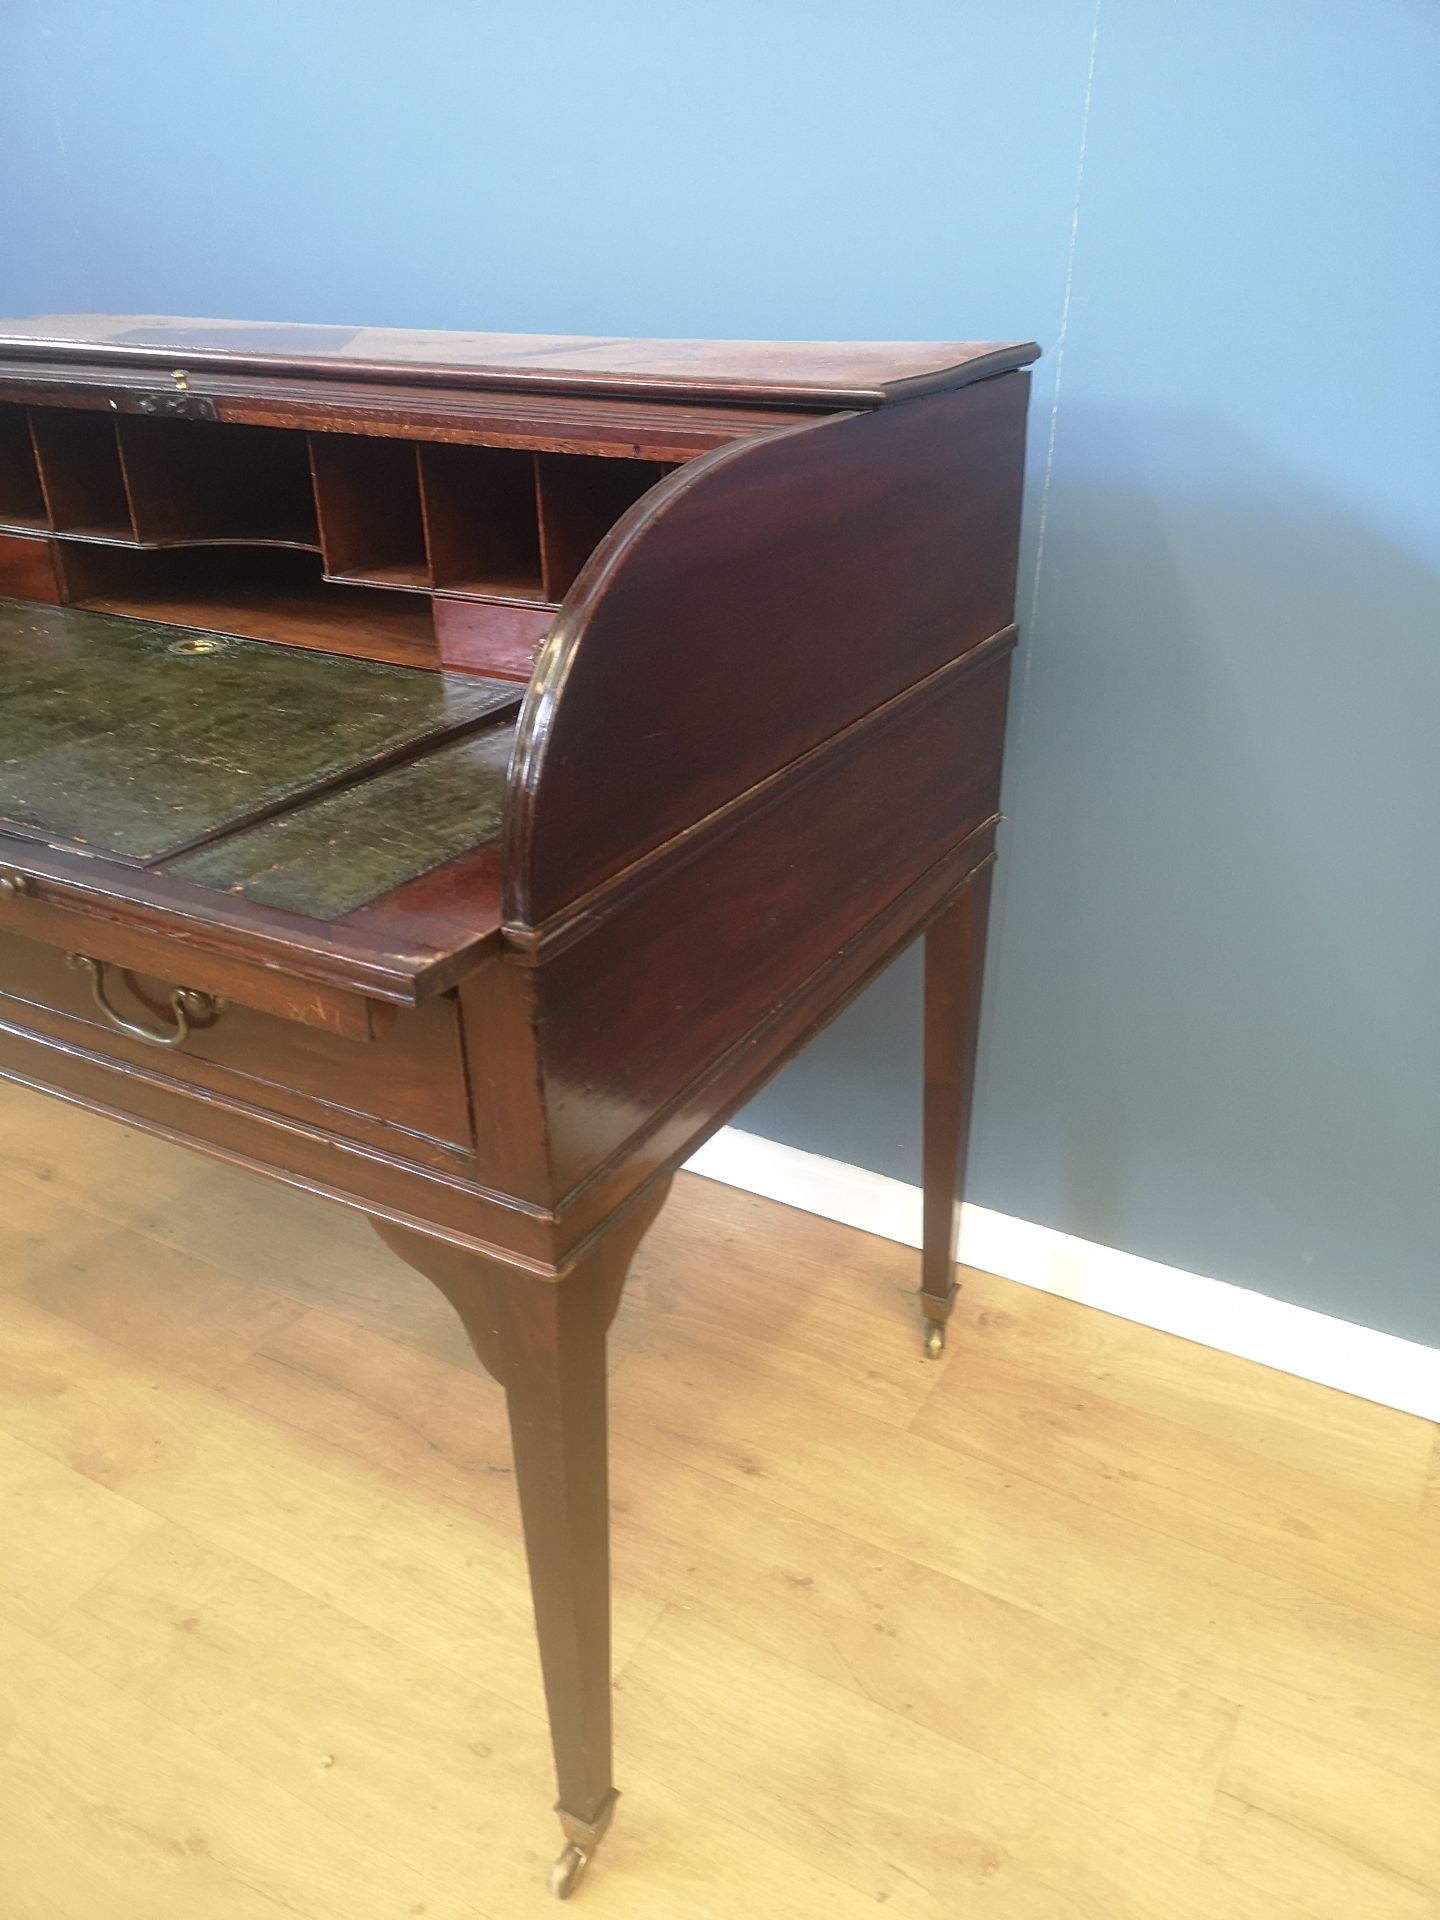 Victorian mahogany desk with tambour front - Image 5 of 5